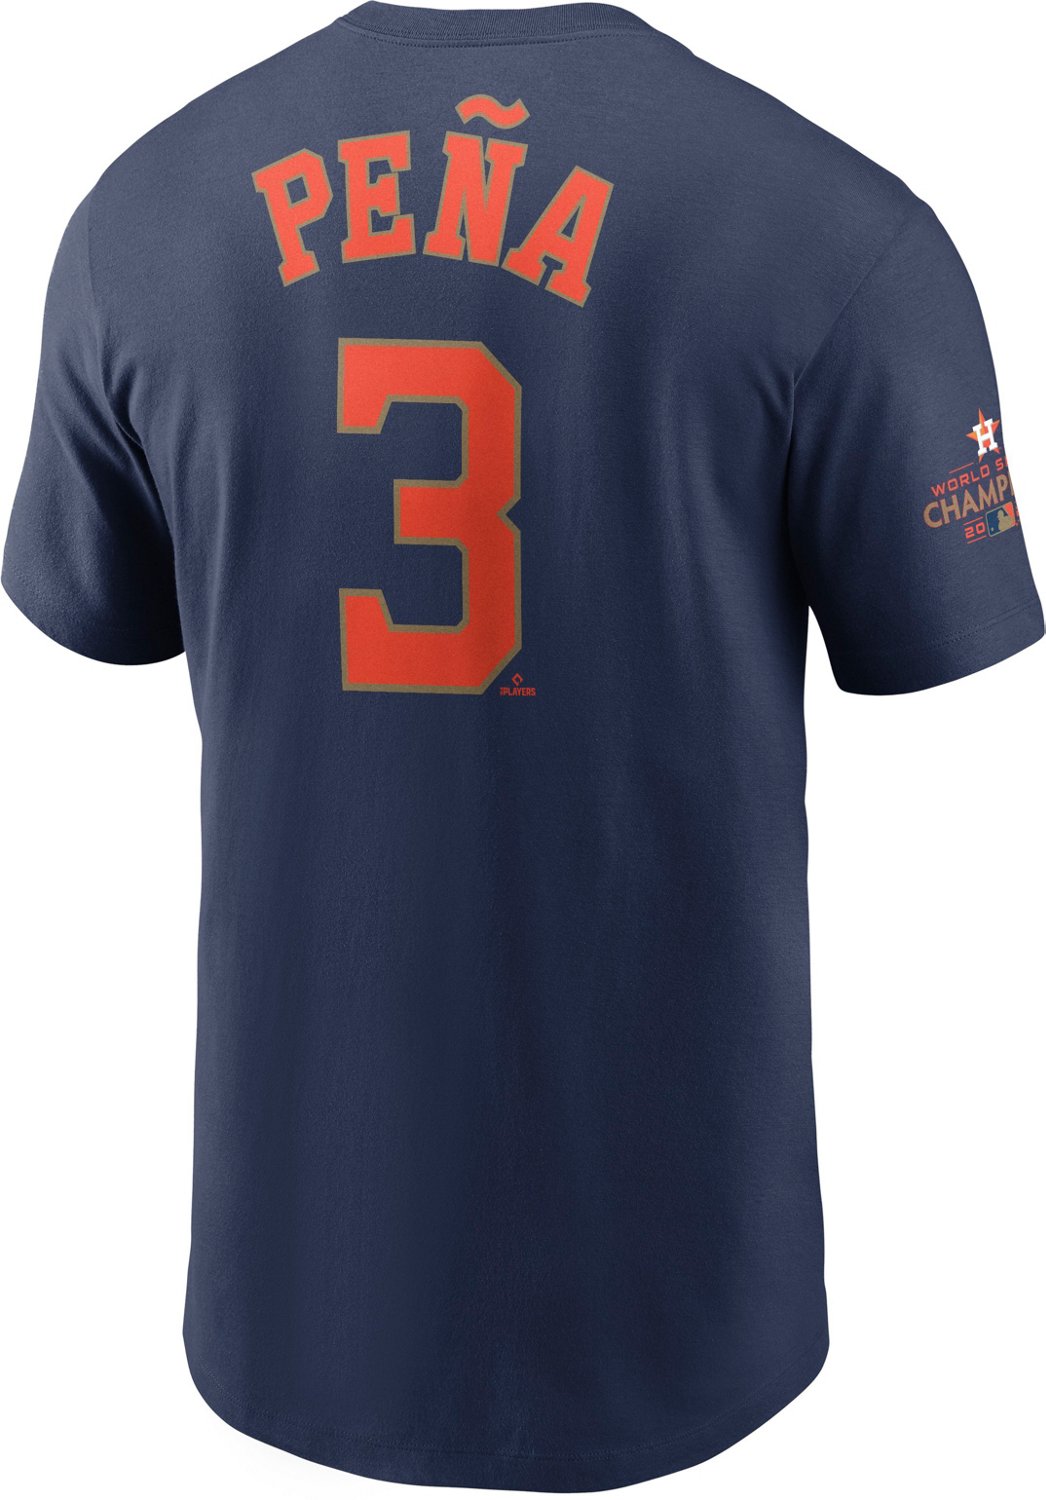 Nike Men's Houston Astros Pena Gold Name and Number Graphic T